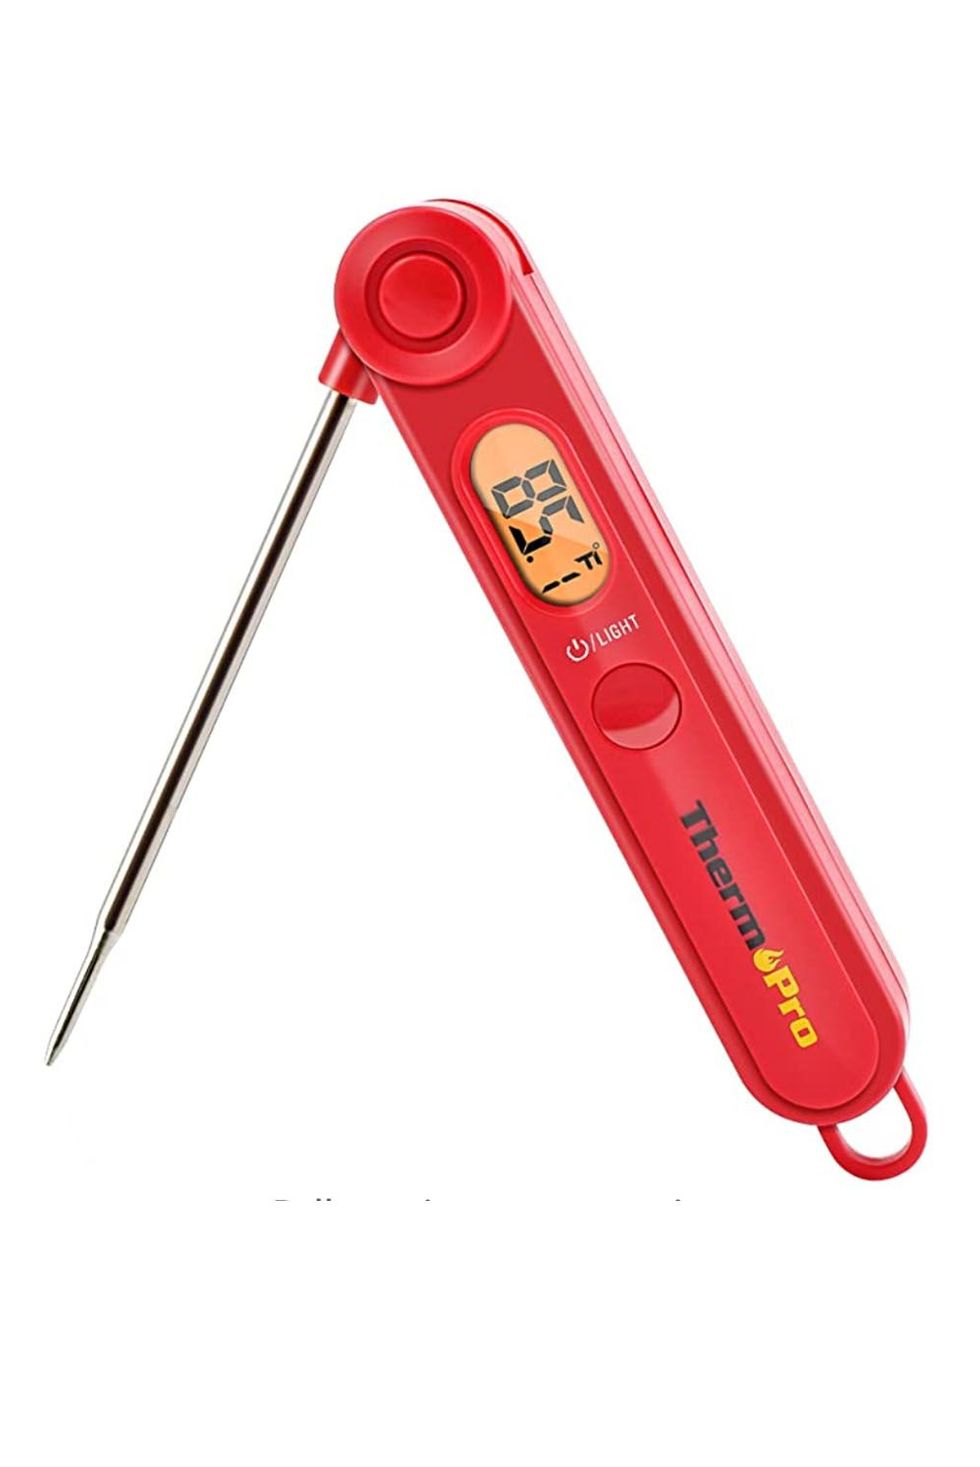 ThermoPro TP03 Digital Instant Read Meat Thermometer